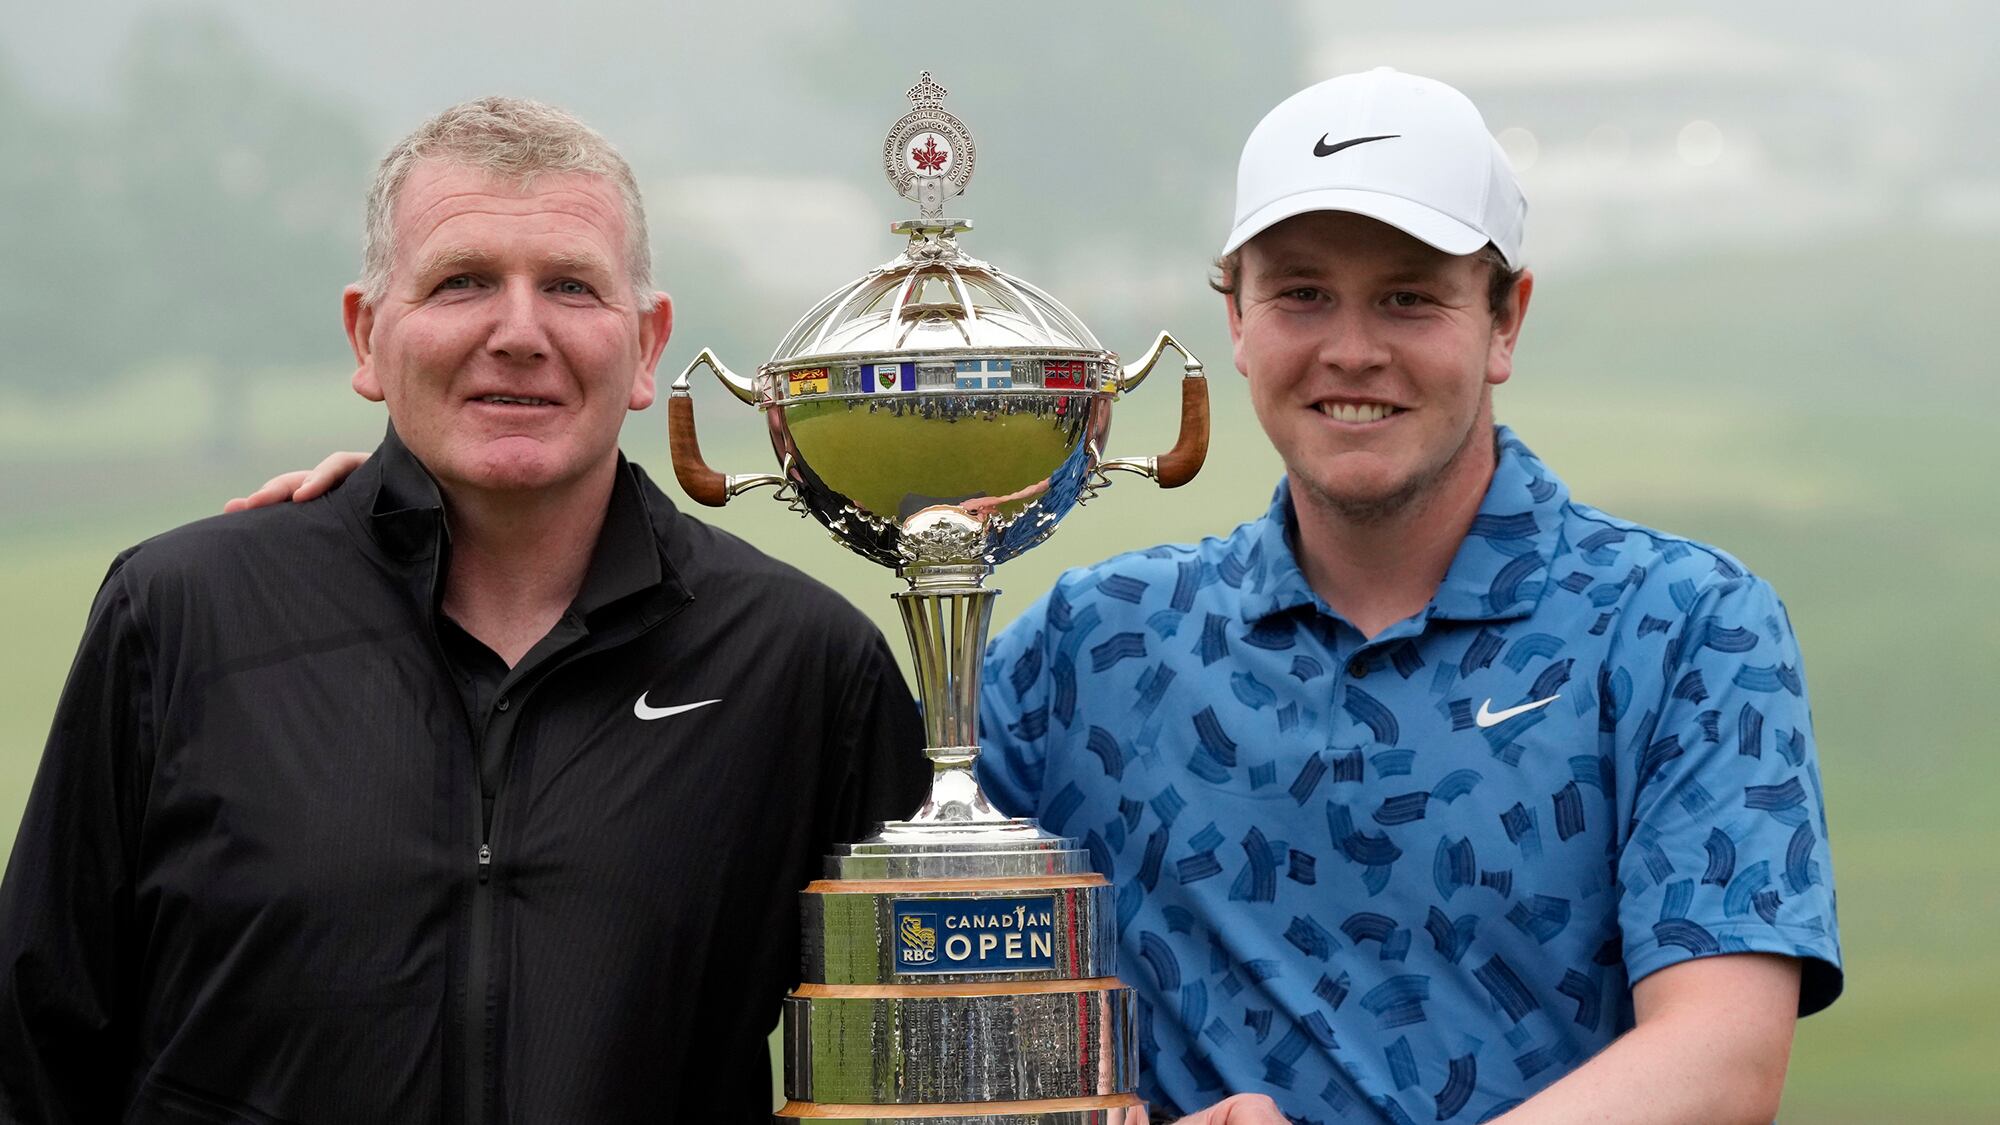 Scotland’s Robert MacIntyre (right) and his father and caddie Dougie pose for photos with the RBC Canadian Open trophy (Frank Gunn/The Canadian Press via AP)